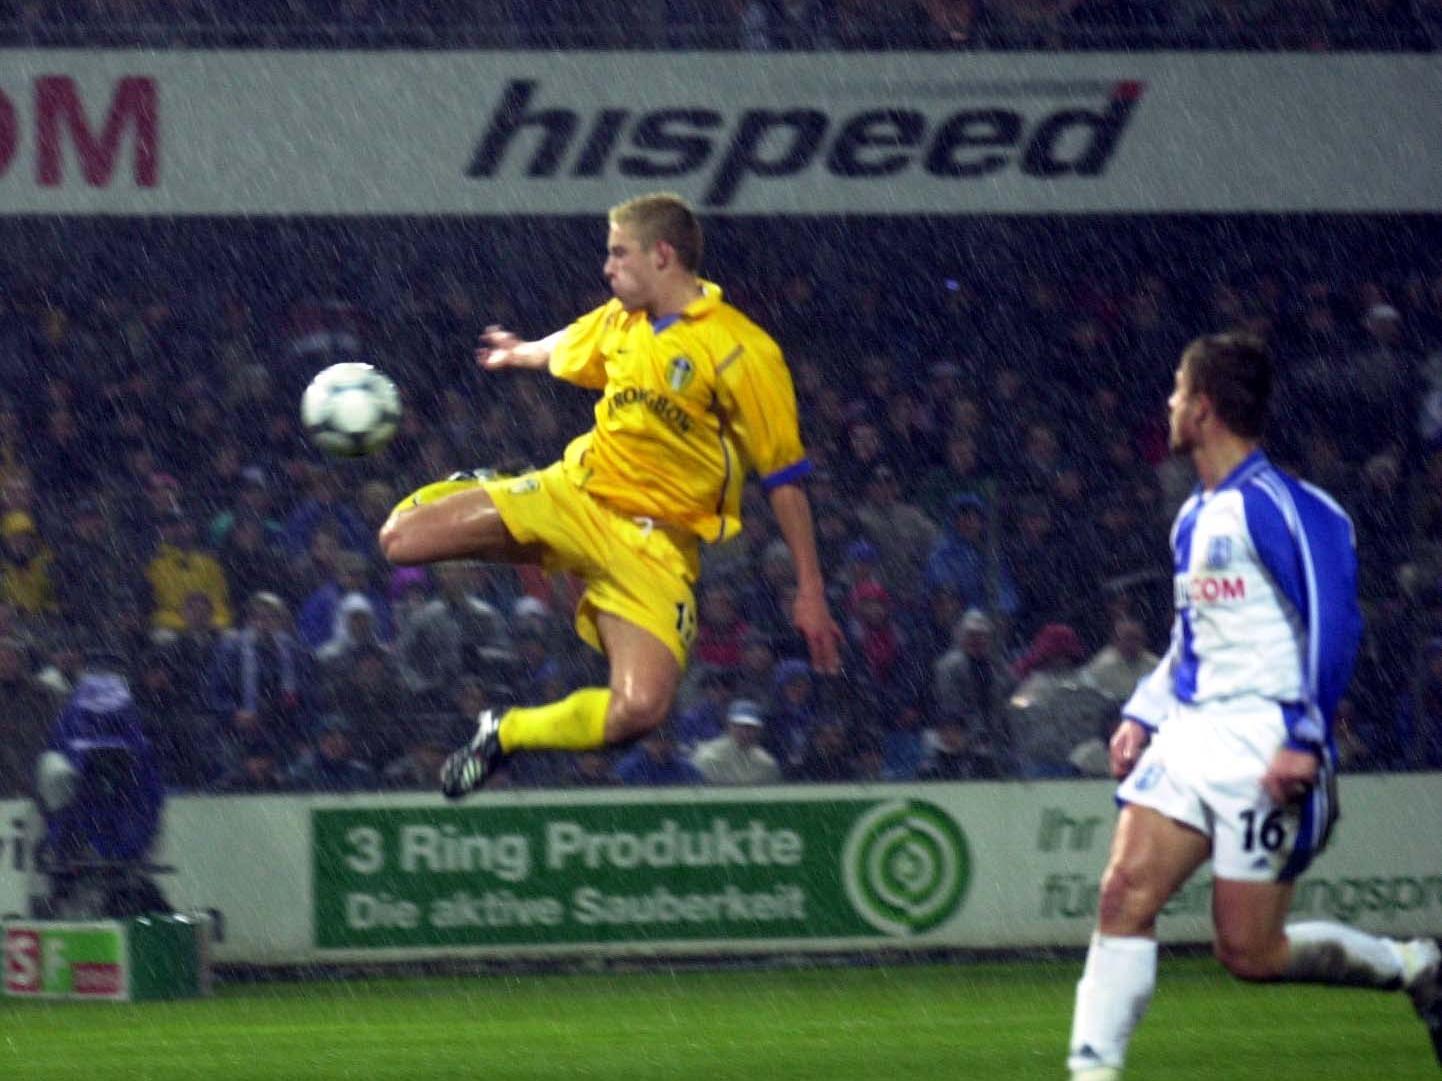 Nigel Martyn's penalty save proved vital in Leeds United's third round first leg win. Harte converted a 22-yard free-kick before Smith slotted in to end Leeds' run of five successive defeats on their travels in European competition